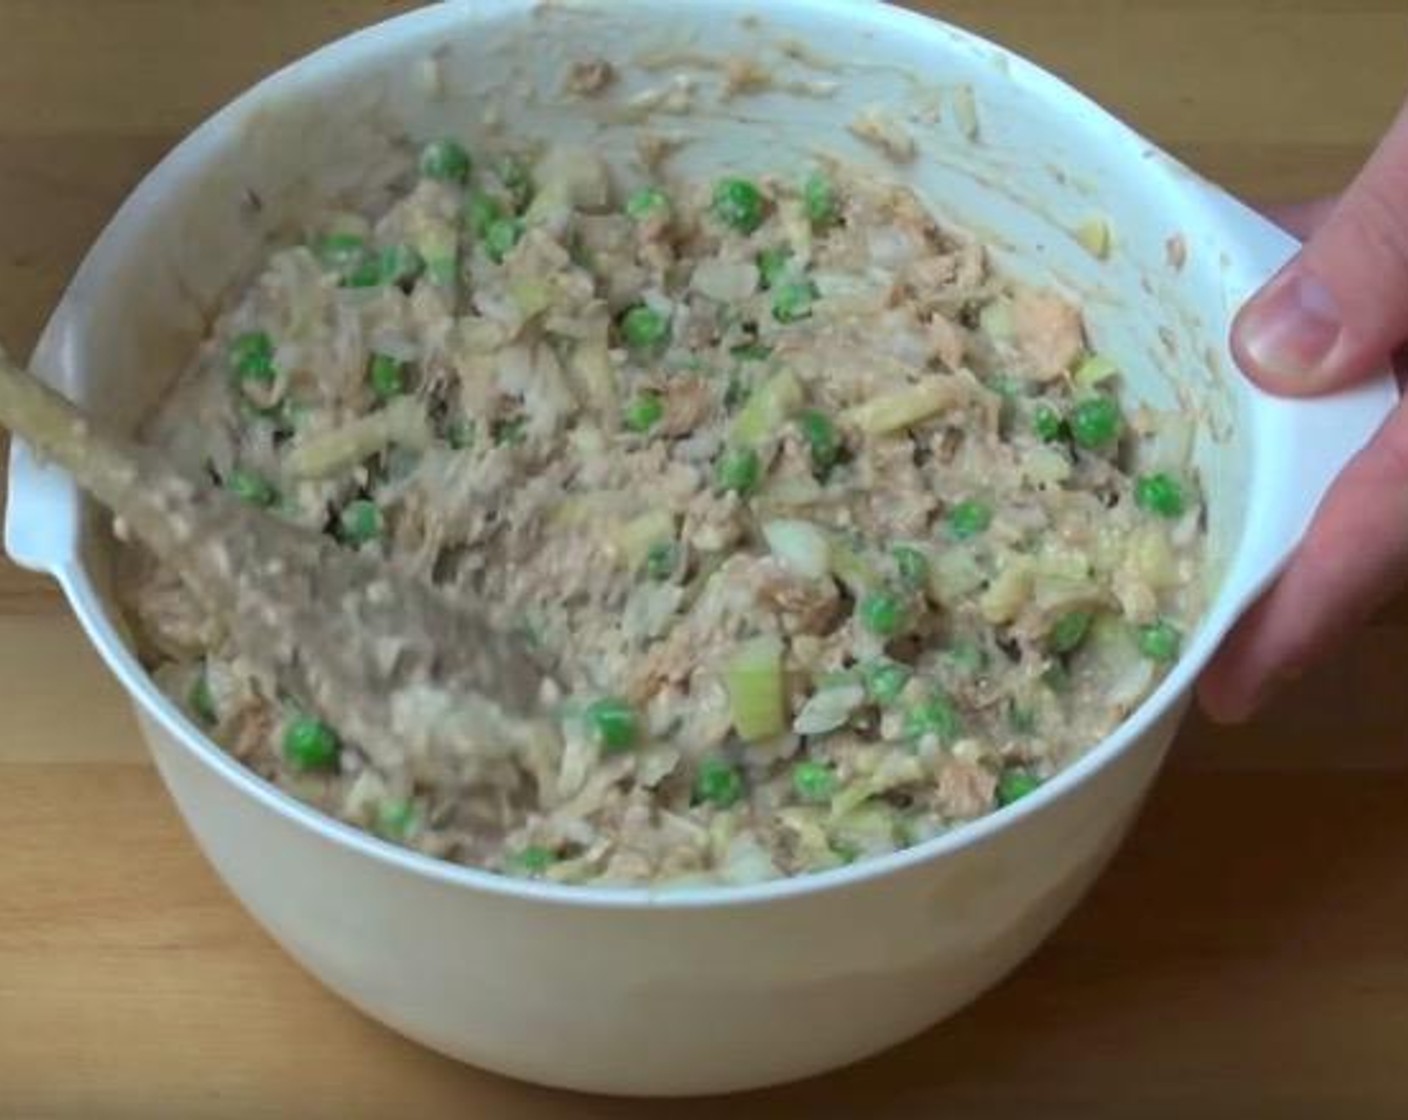 step 1 In a mixing bowl, add the cooked White Rice (2 1/2 Tbsp), Yellow Onion (1), Cheddar Cheese (1/2 cup), Pink Salmon (14 oz), Frozen Green Peas (2 cups) and Cream of Mushroom Soup (14 oz). Mix together.